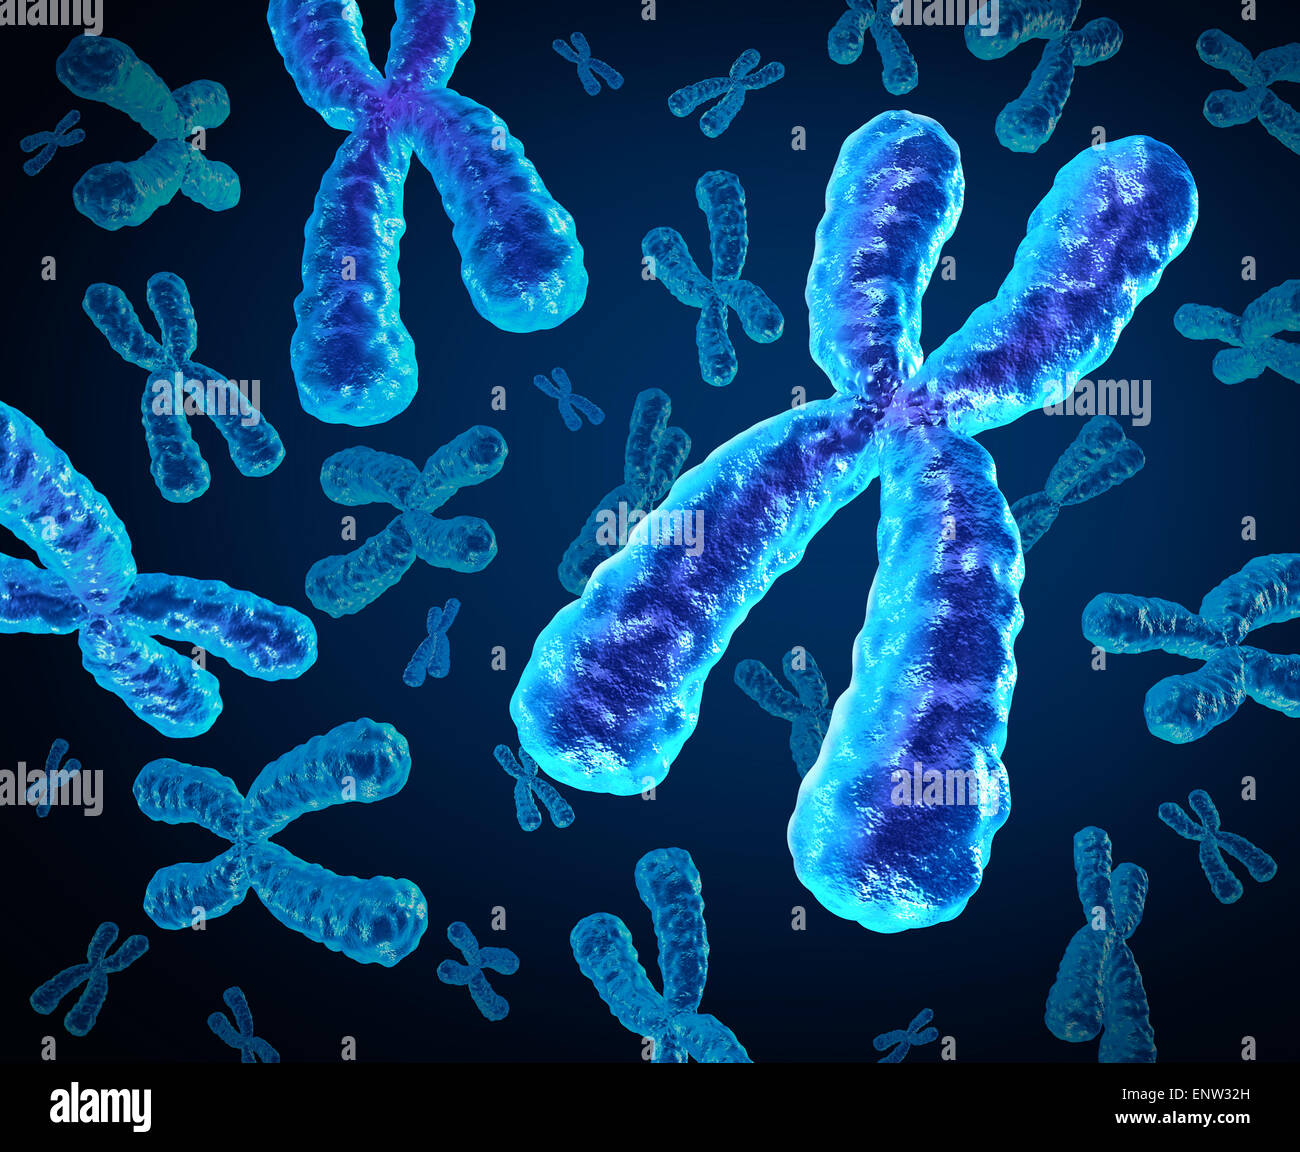 Chromosomes group as a concept for a human biology x structure containing dna genetic information as a medical symbol for gene therapy or microbiology genetics research. Stock Photo